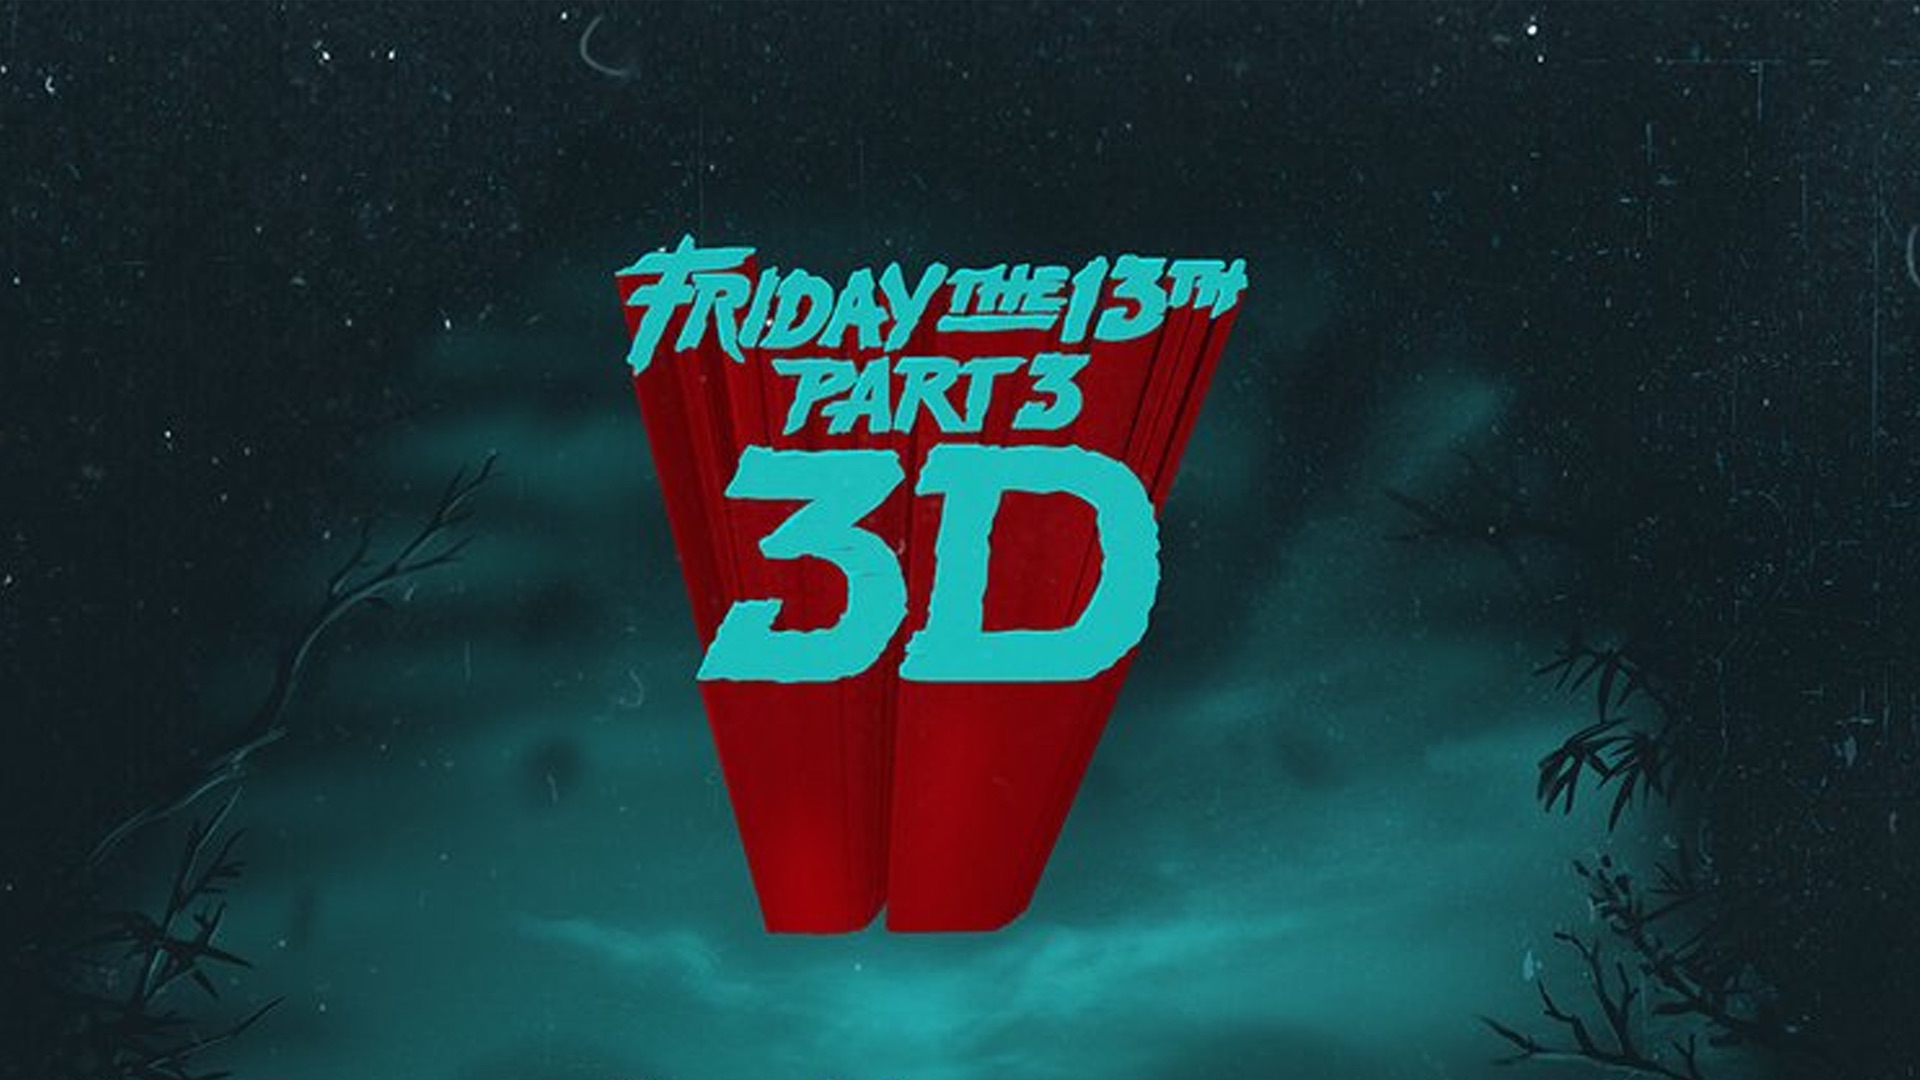 Friday The 13th Part Iii 3d - HD Wallpaper 